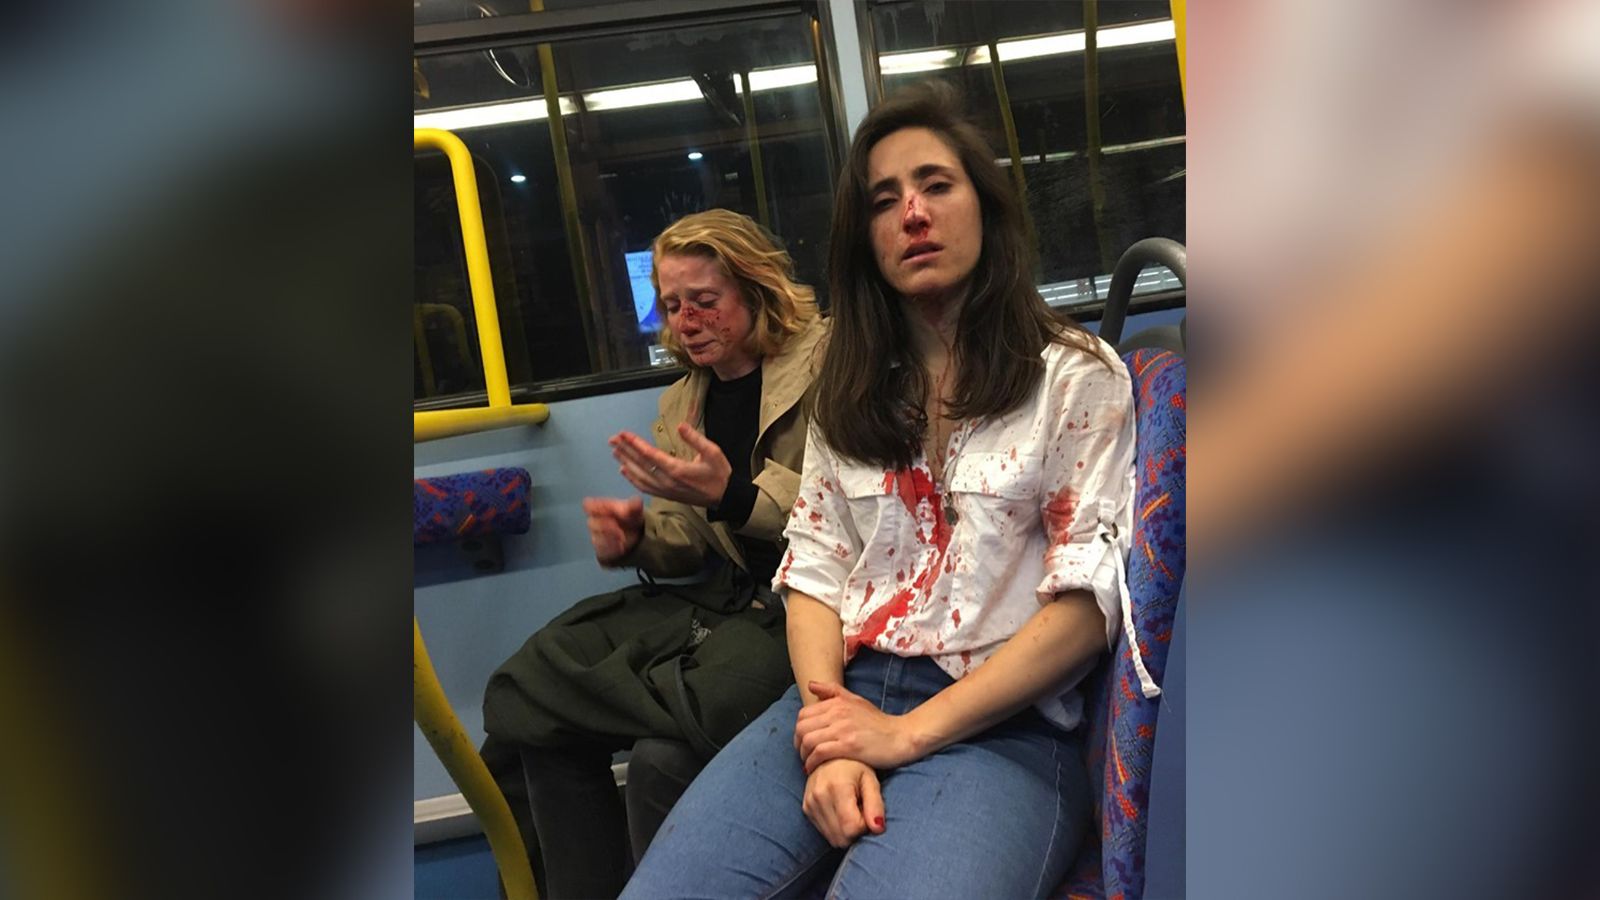 London bus attack: Lesbian couple viciously beaten in homophobic incident |  CNN